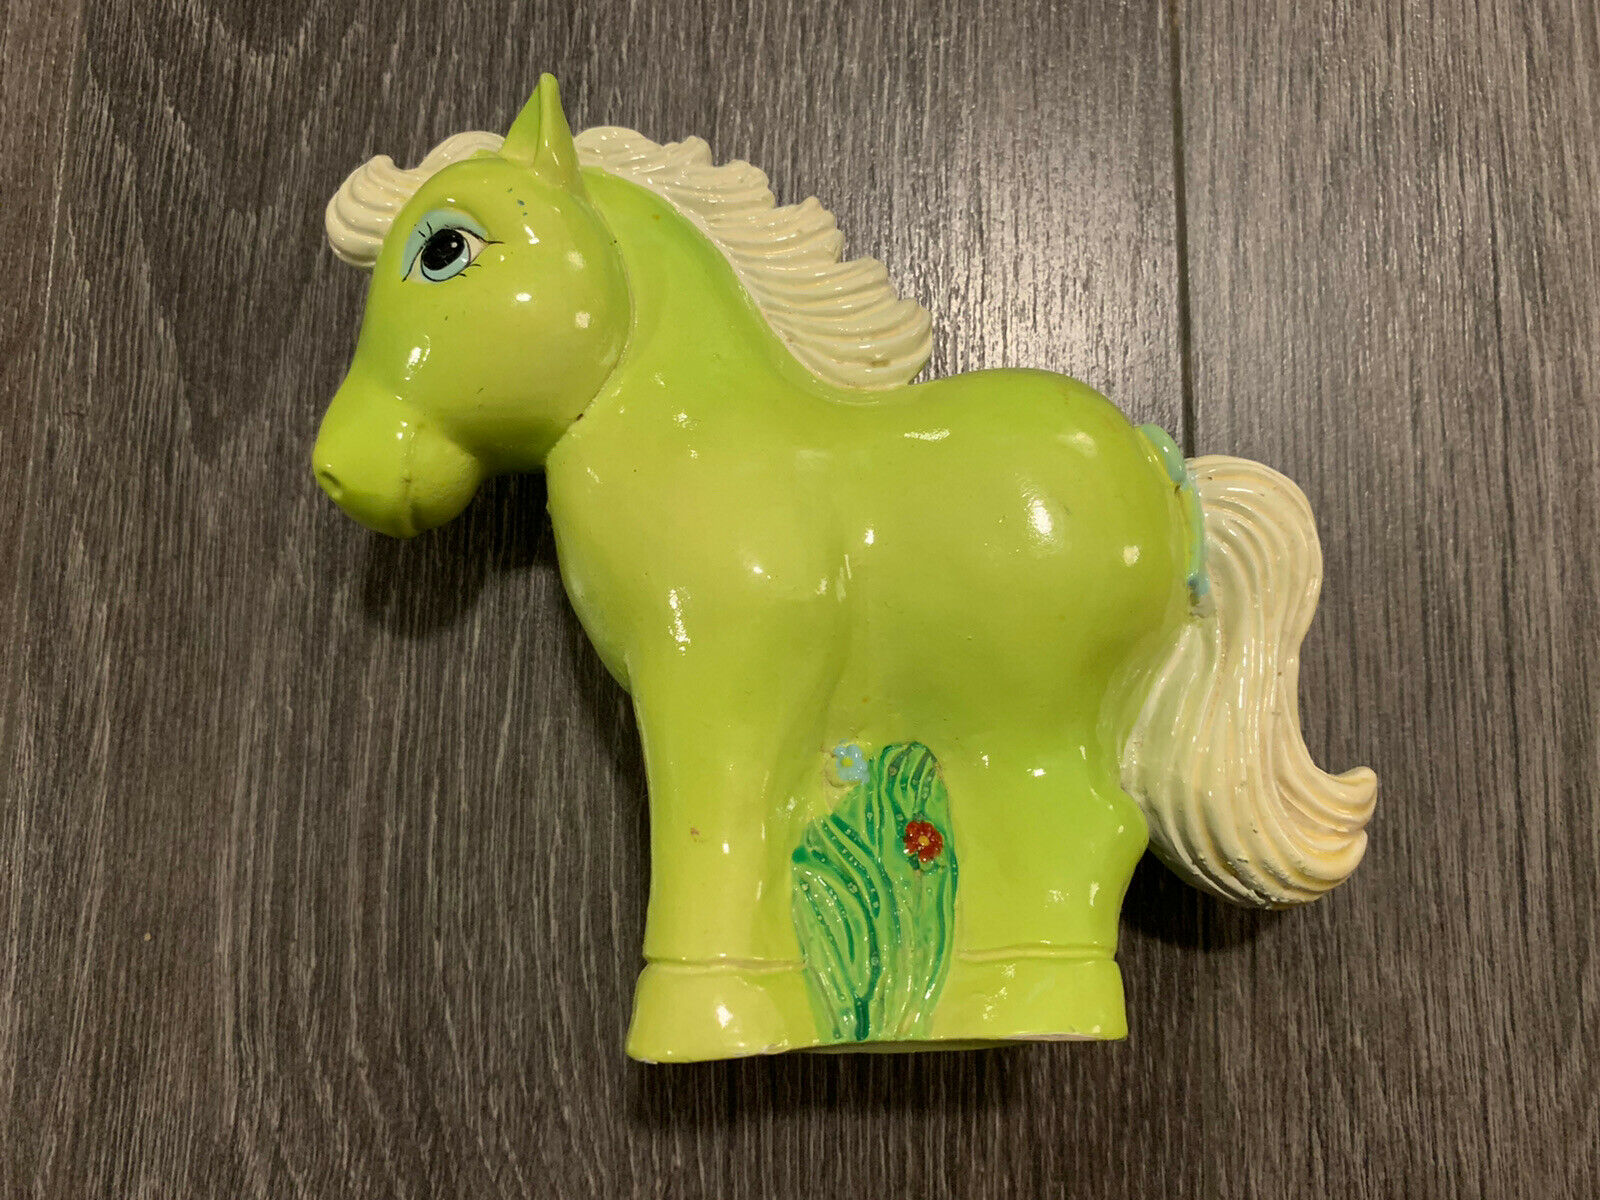 Vtg Neon Green 6” Little Pony Coin Bank Small World 1984 Taiwan Toy Plastic